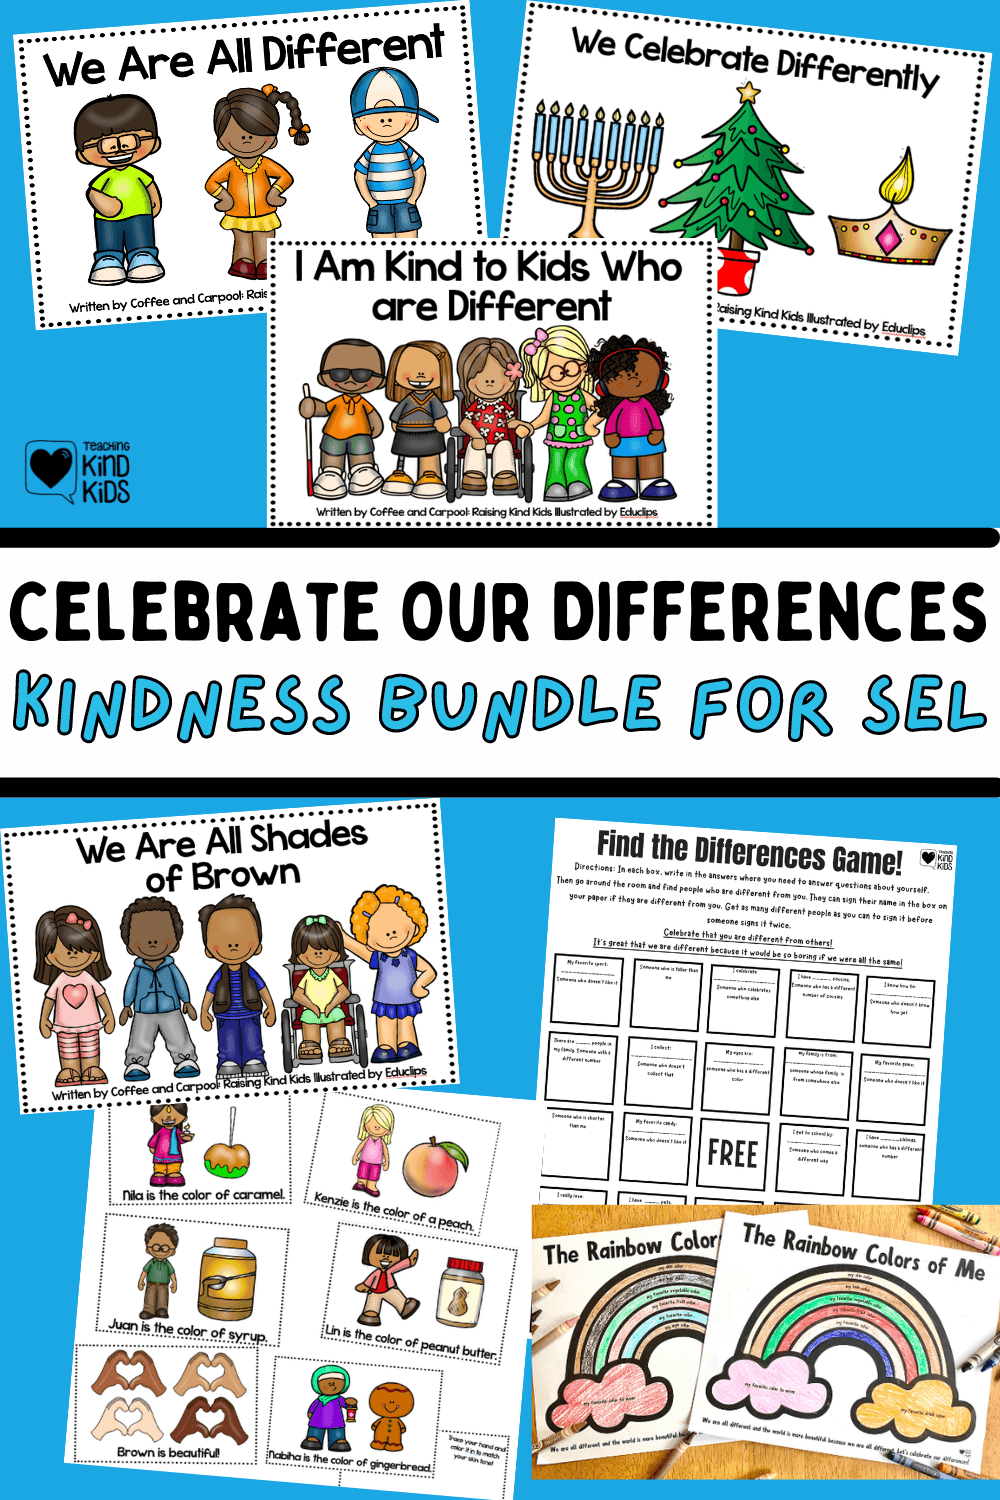 This Celebrate our differences bundle helps kids celebrate, showcase and appreciate our differences in fun, hands on ways.